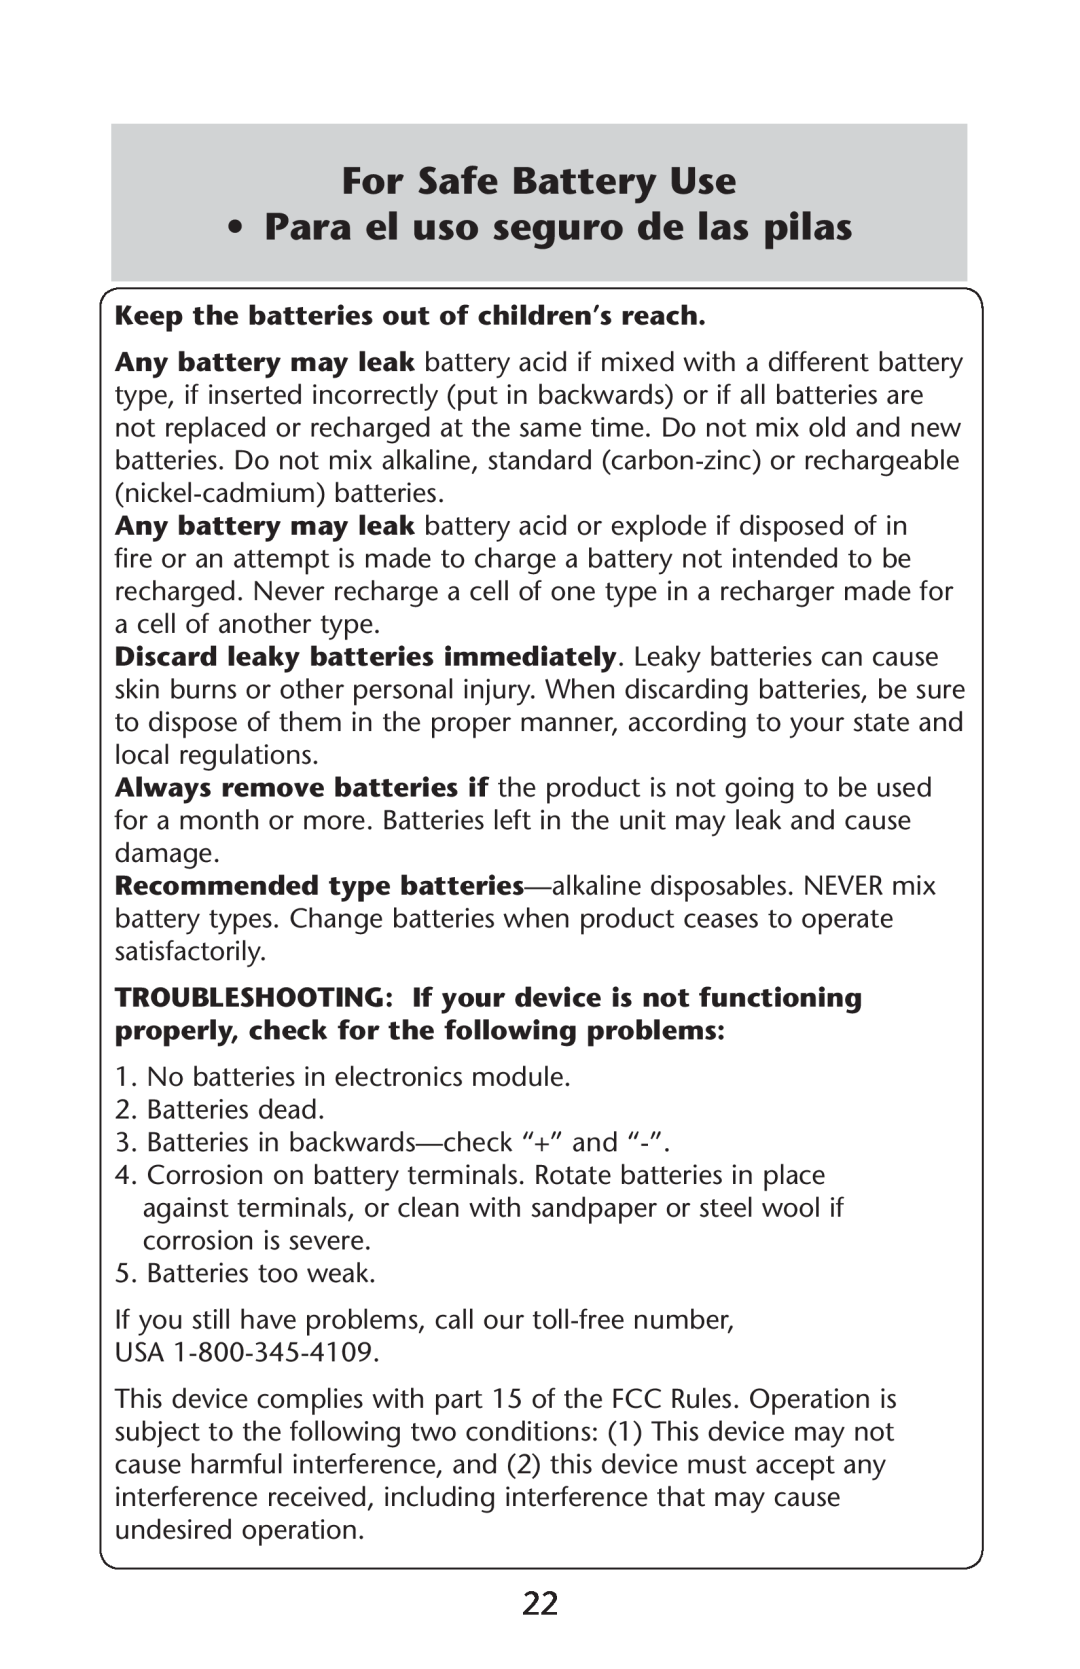 Graco PD227120B For Safe Battery Use ss 0ARA EL USOSSEGURO DE LASAPILAS, Keep the batteries out of children’s reach 